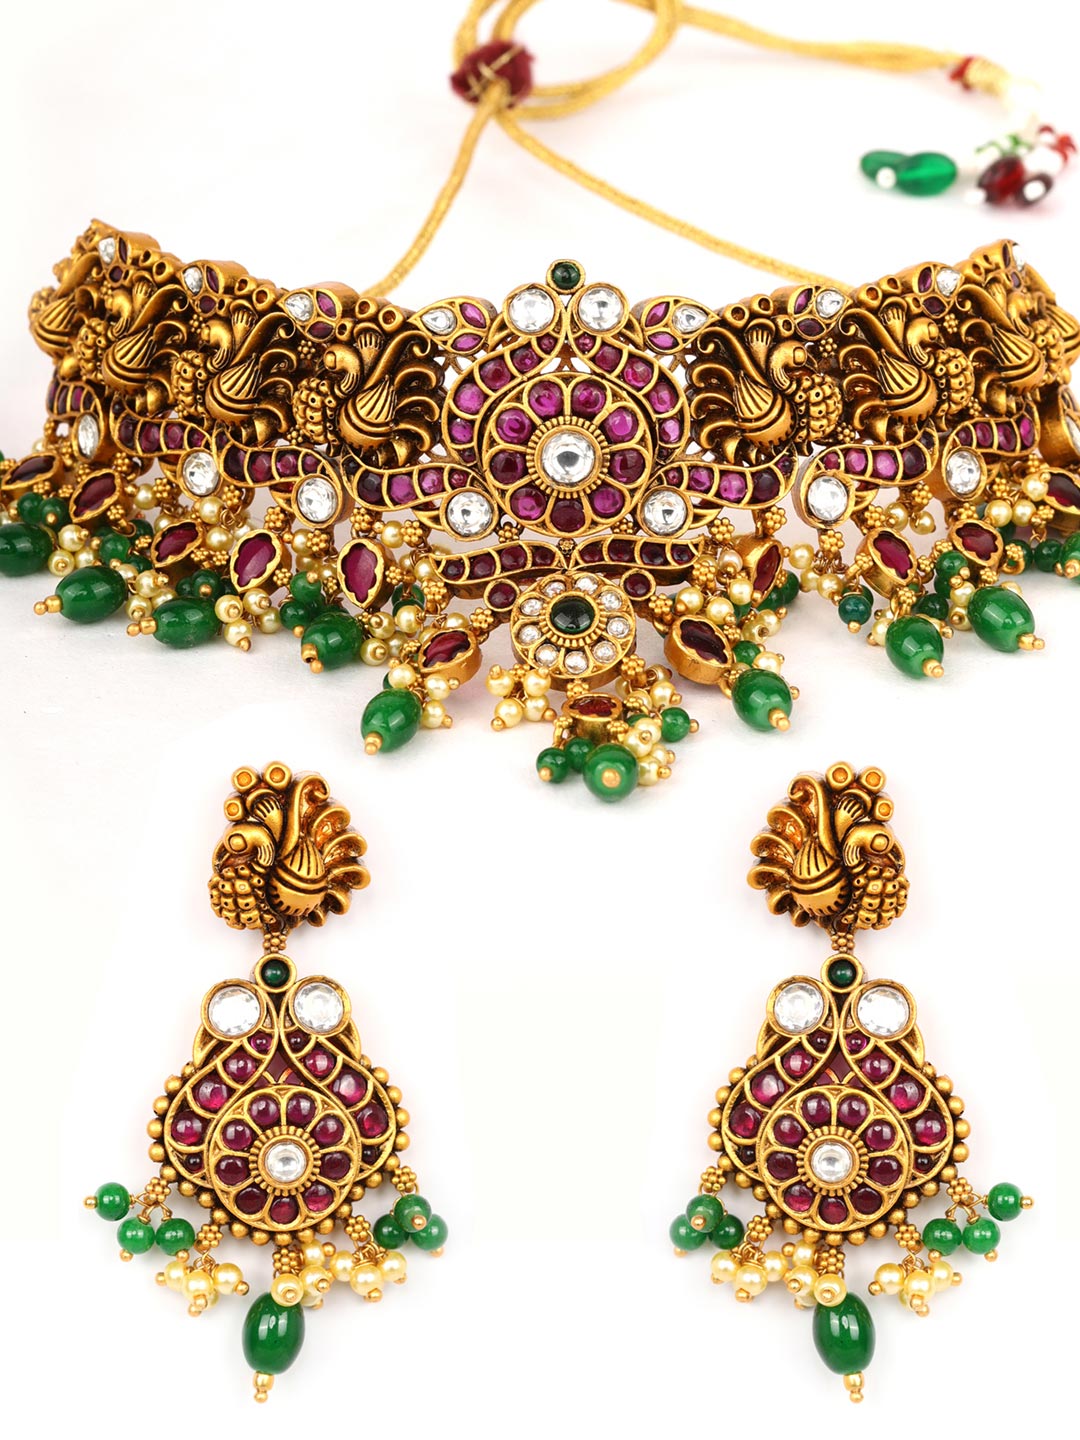 Green Pearls Beads Ruby Stones Gold Plated Peacock Choker